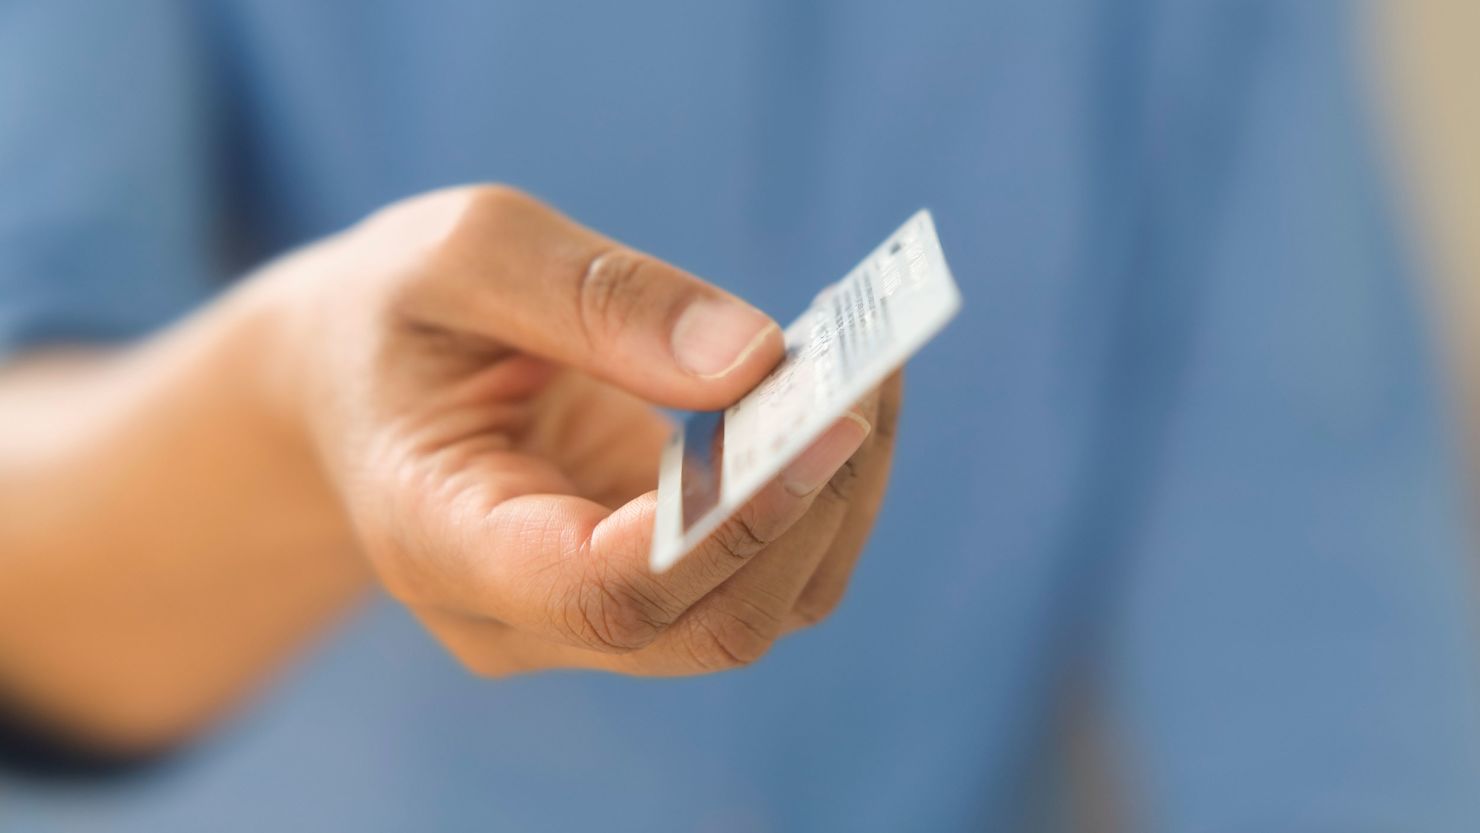 Contingency management programs reward participants with small-value gift cards for submitting negative urine drug tests.